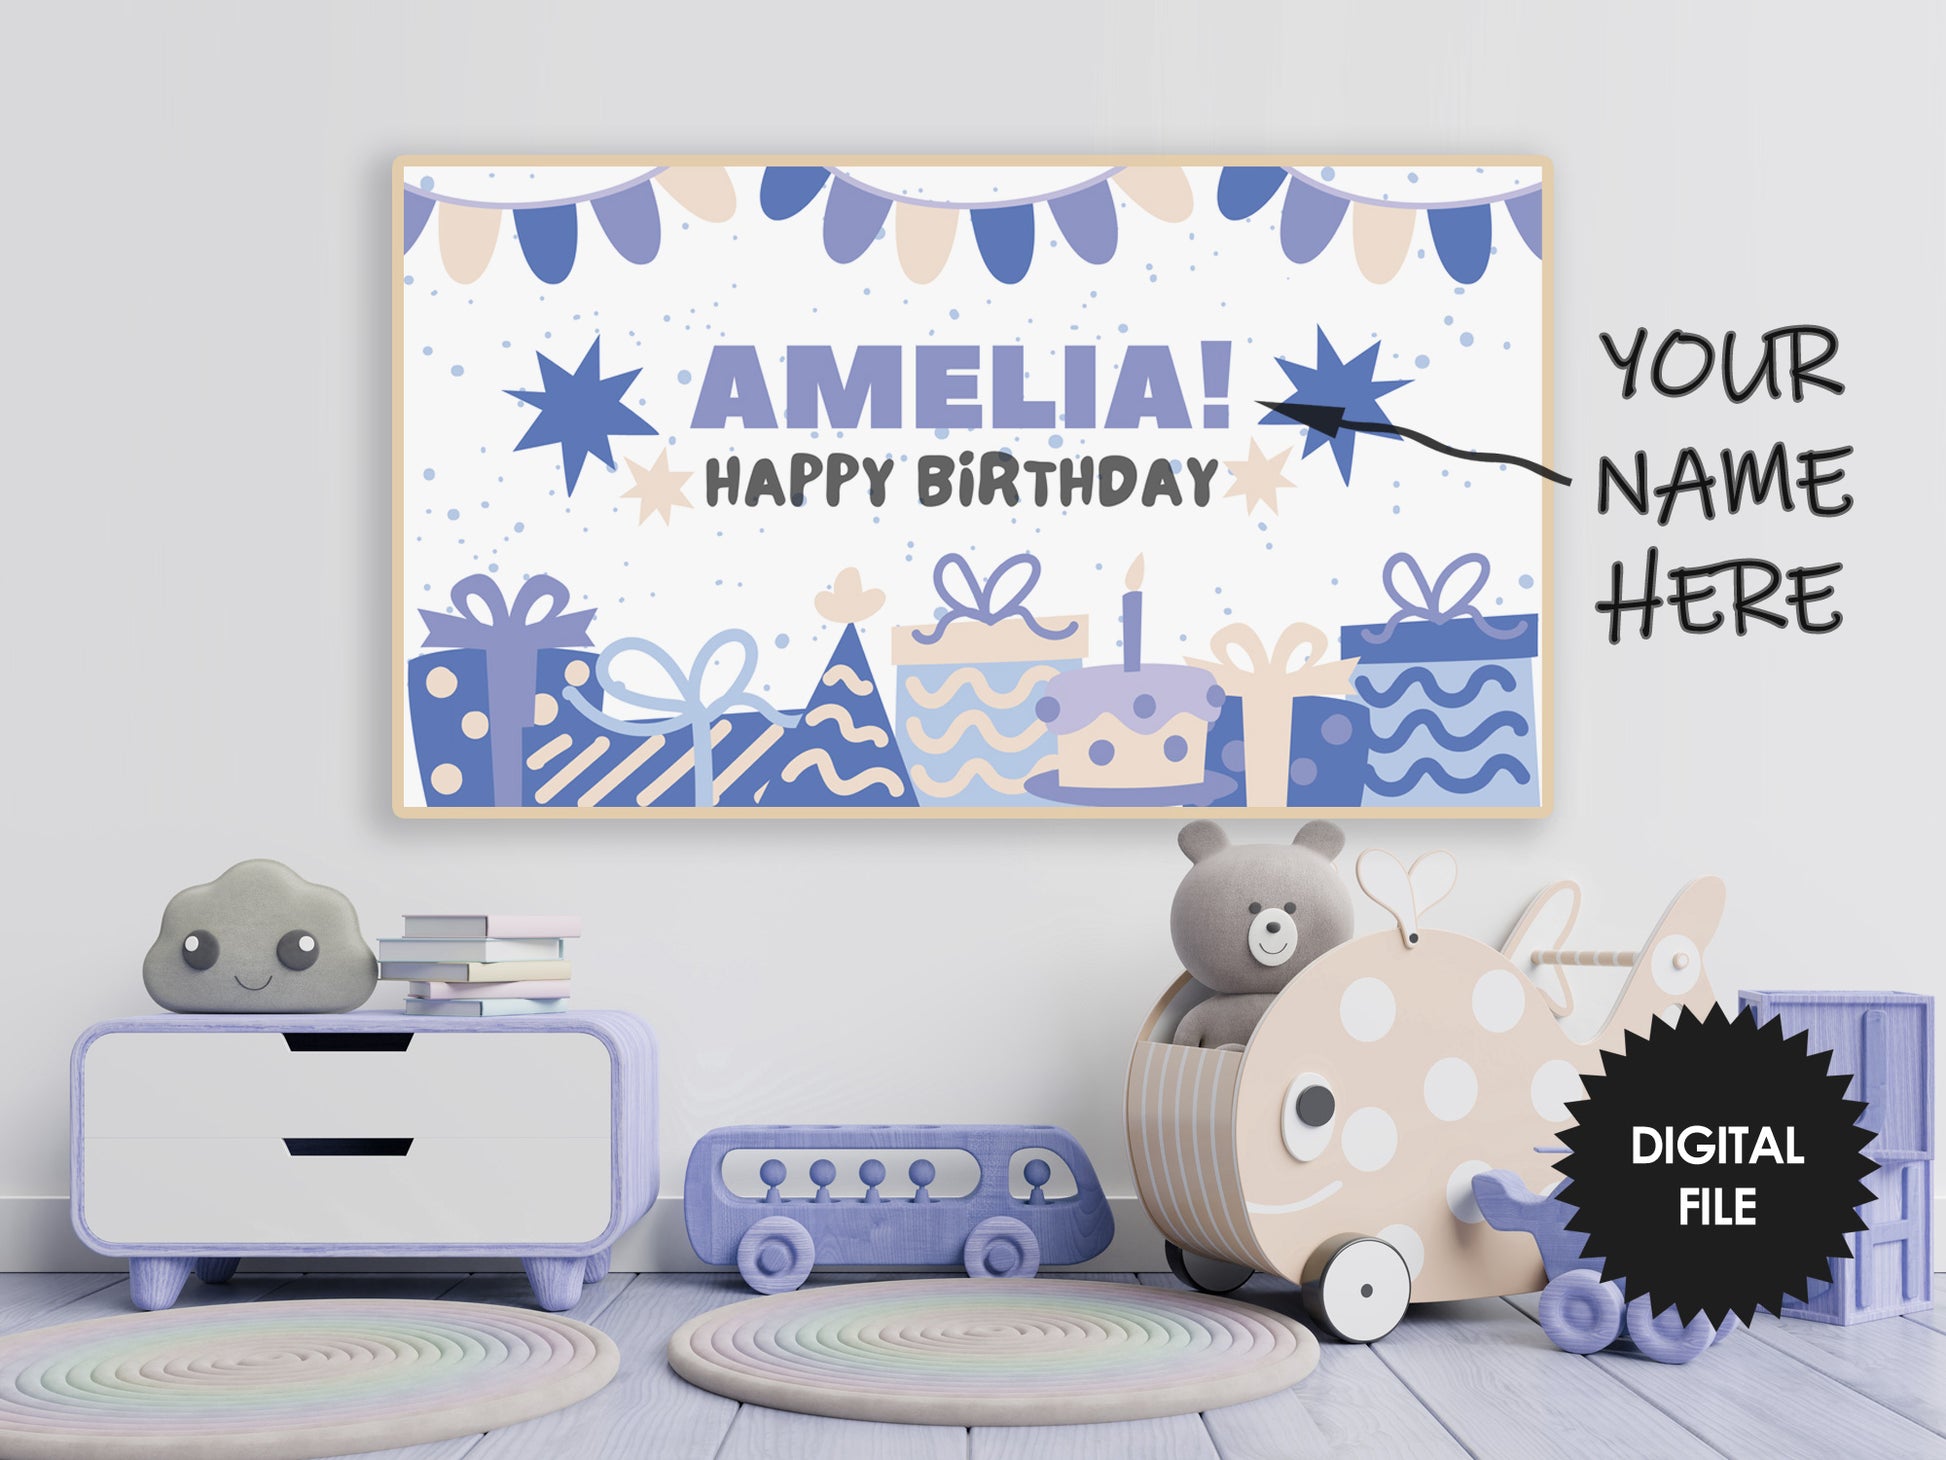 Personalized Birthday Samsung Frame TV Art For Kids preview in nursery room